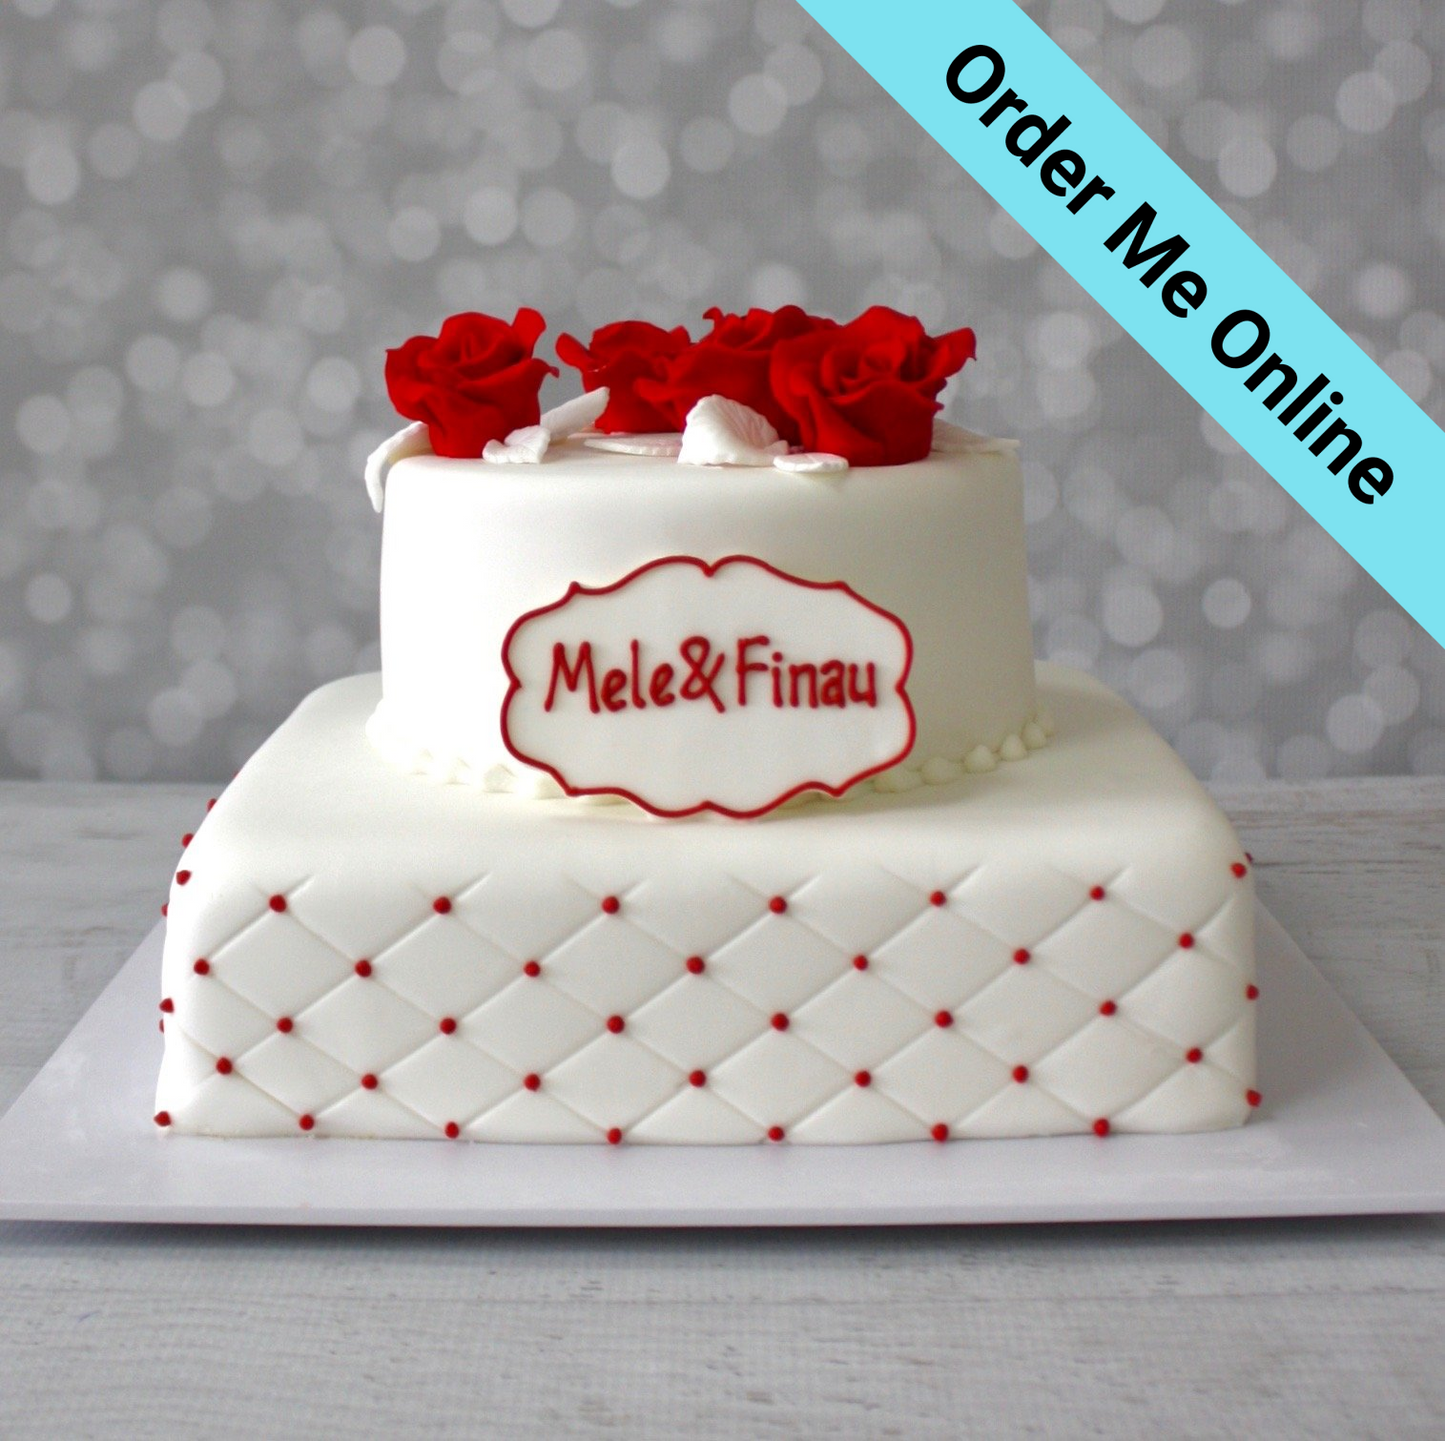 Buy Online Just Engaged Wedding Cake To Make Someone's Day More Special |  Winni.in